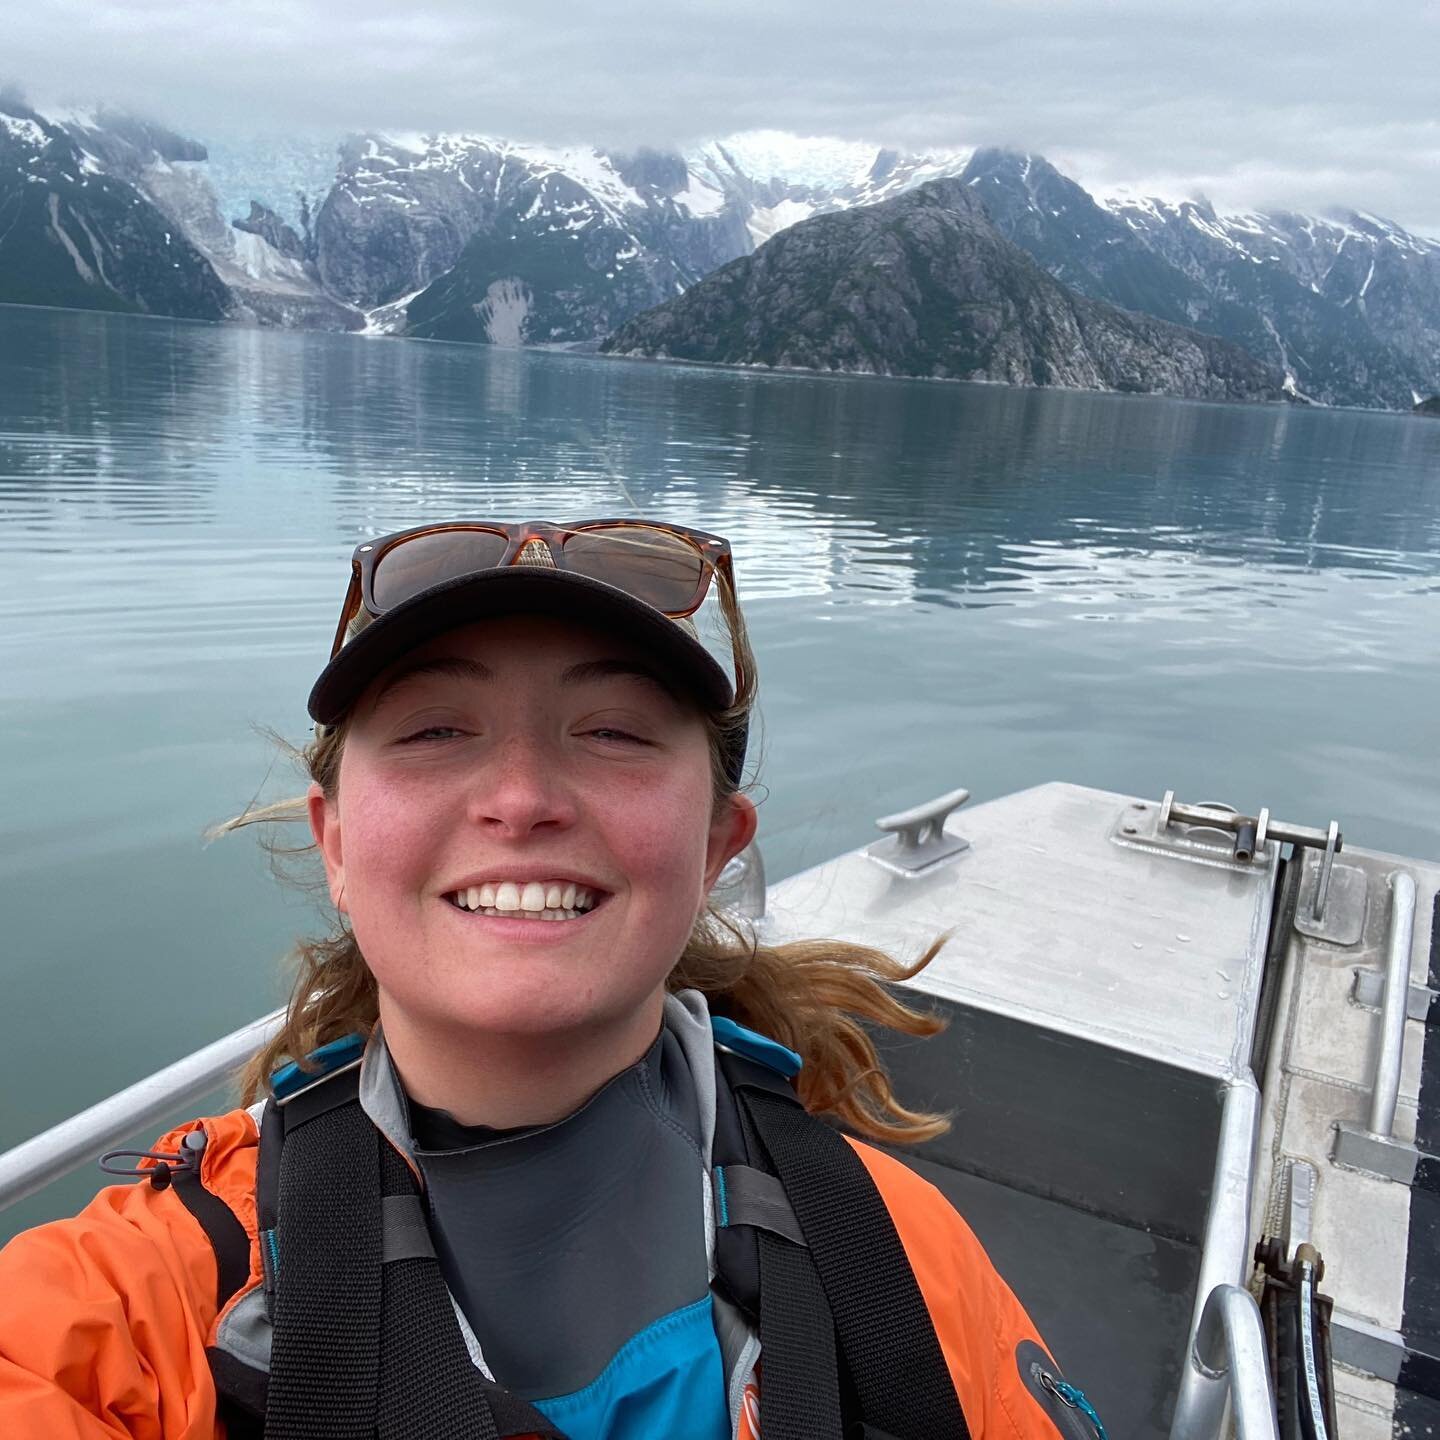 From guiding in Alaska and Montana, to running a half marathon at the Tetons, to retreating to the Northern Minnesota waters, to working with animals at a vet clinic, our guides have been busy (having tons of fun) this summer! We&rsquo;re all stoked 